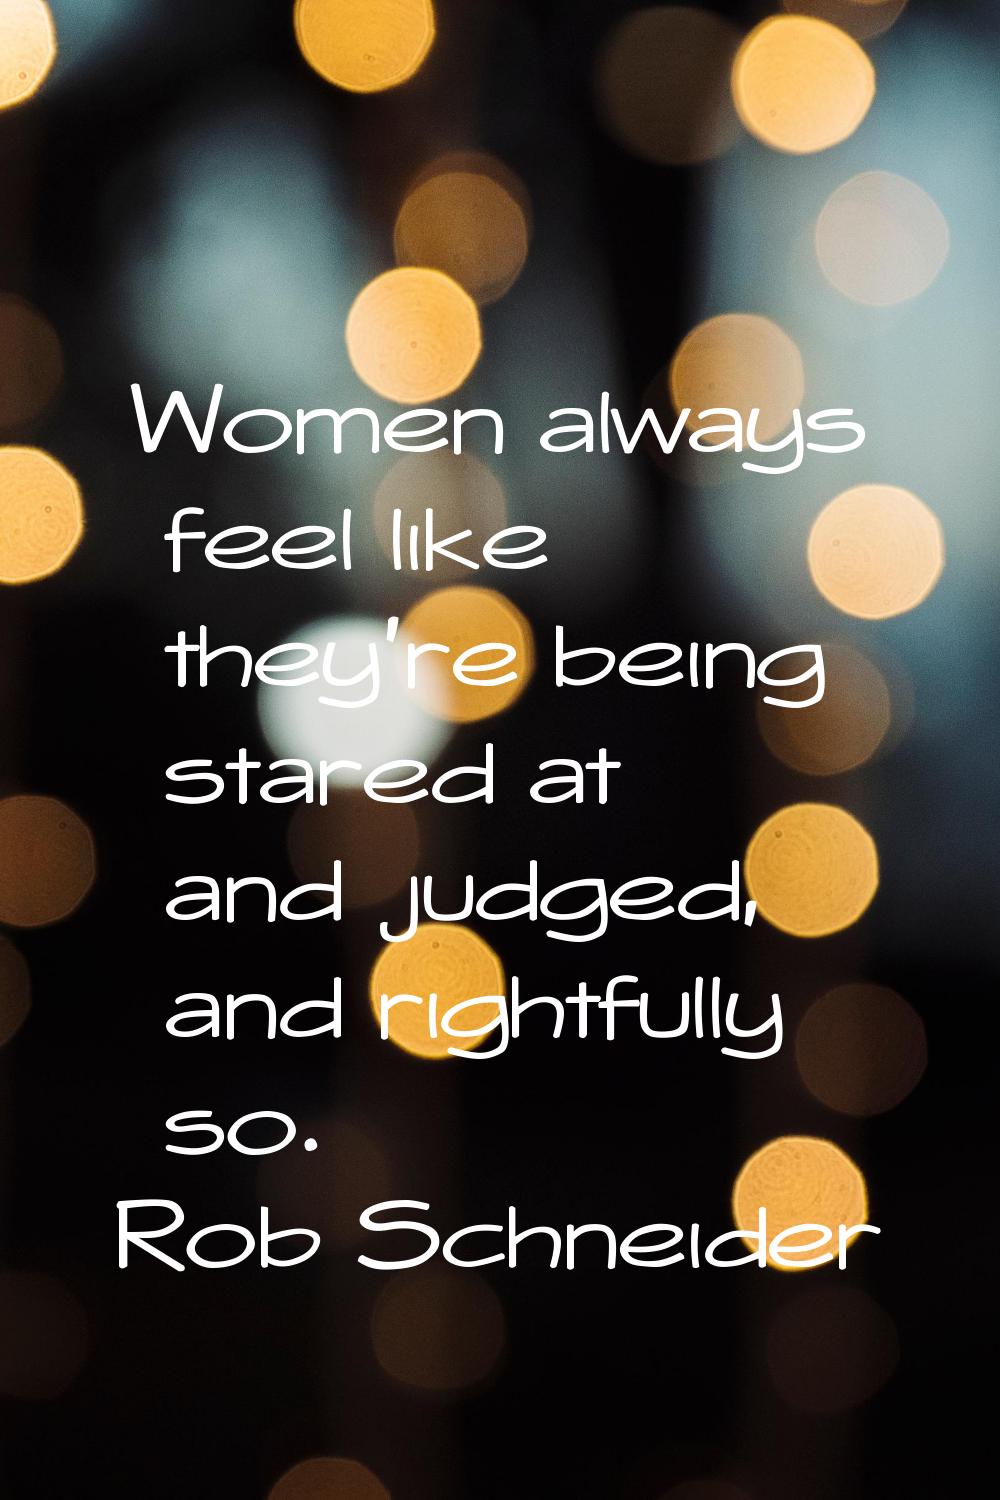 Women always feel like they're being stared at and judged, and rightfully so.